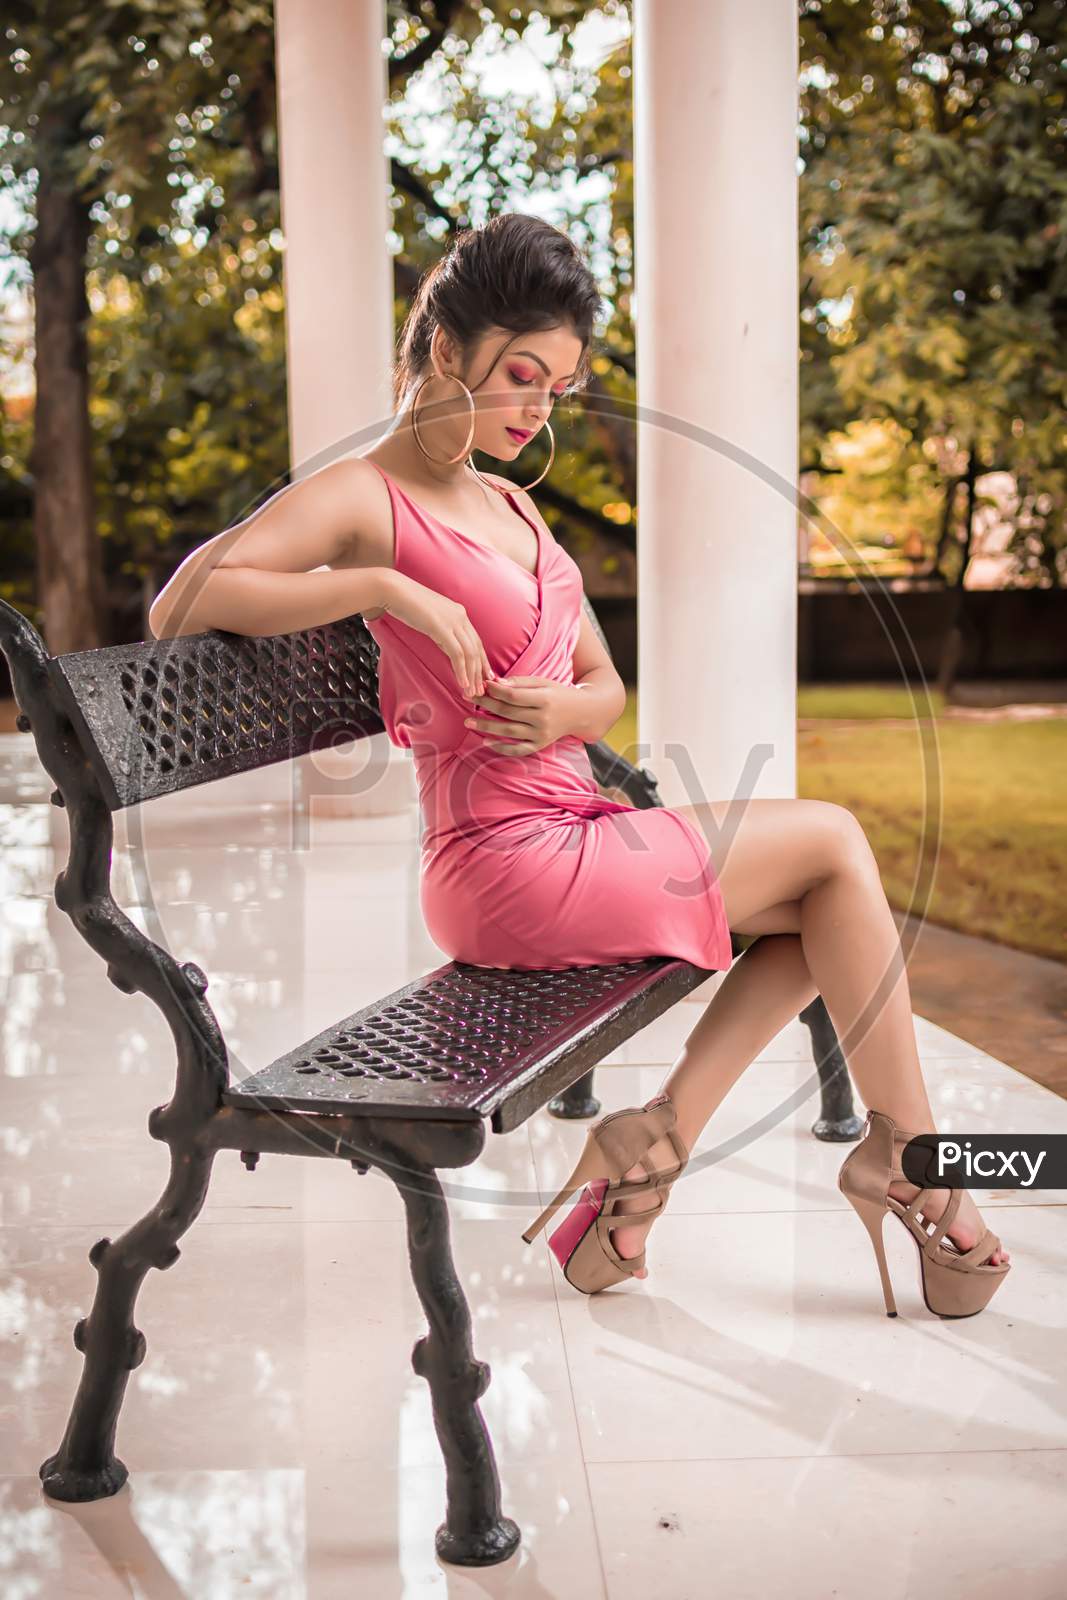 Shantiniketan, India. Fashion Portrait Of Beautiful Indian Young Girl Sitting On A Bench, Wearing A Pink Dress, Sunny Day In The Park, Relaxing, After Work Business Woman. September 2019